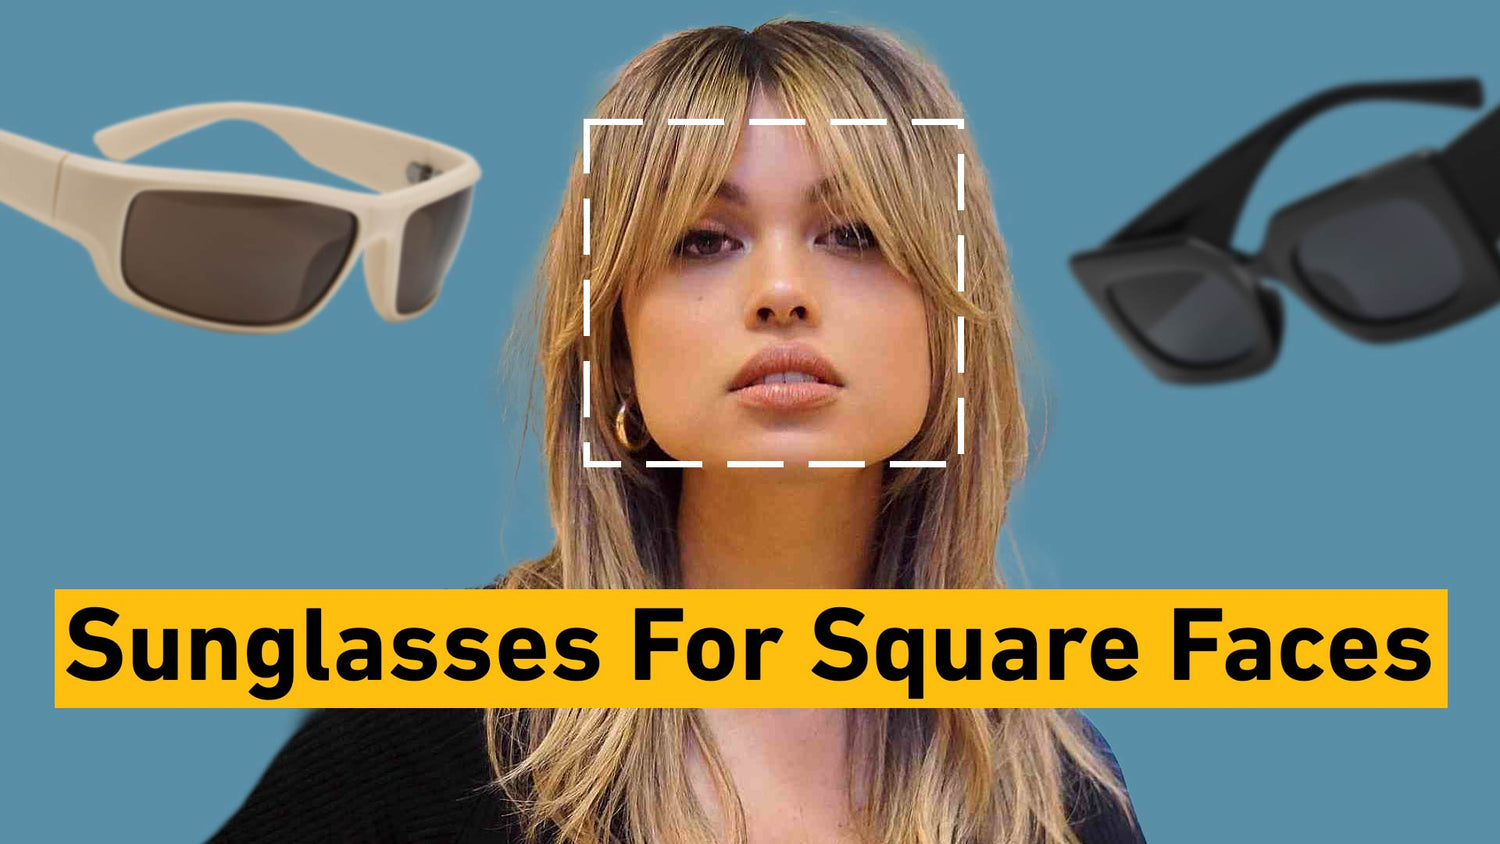 The Best Sunglasses for Square Faces